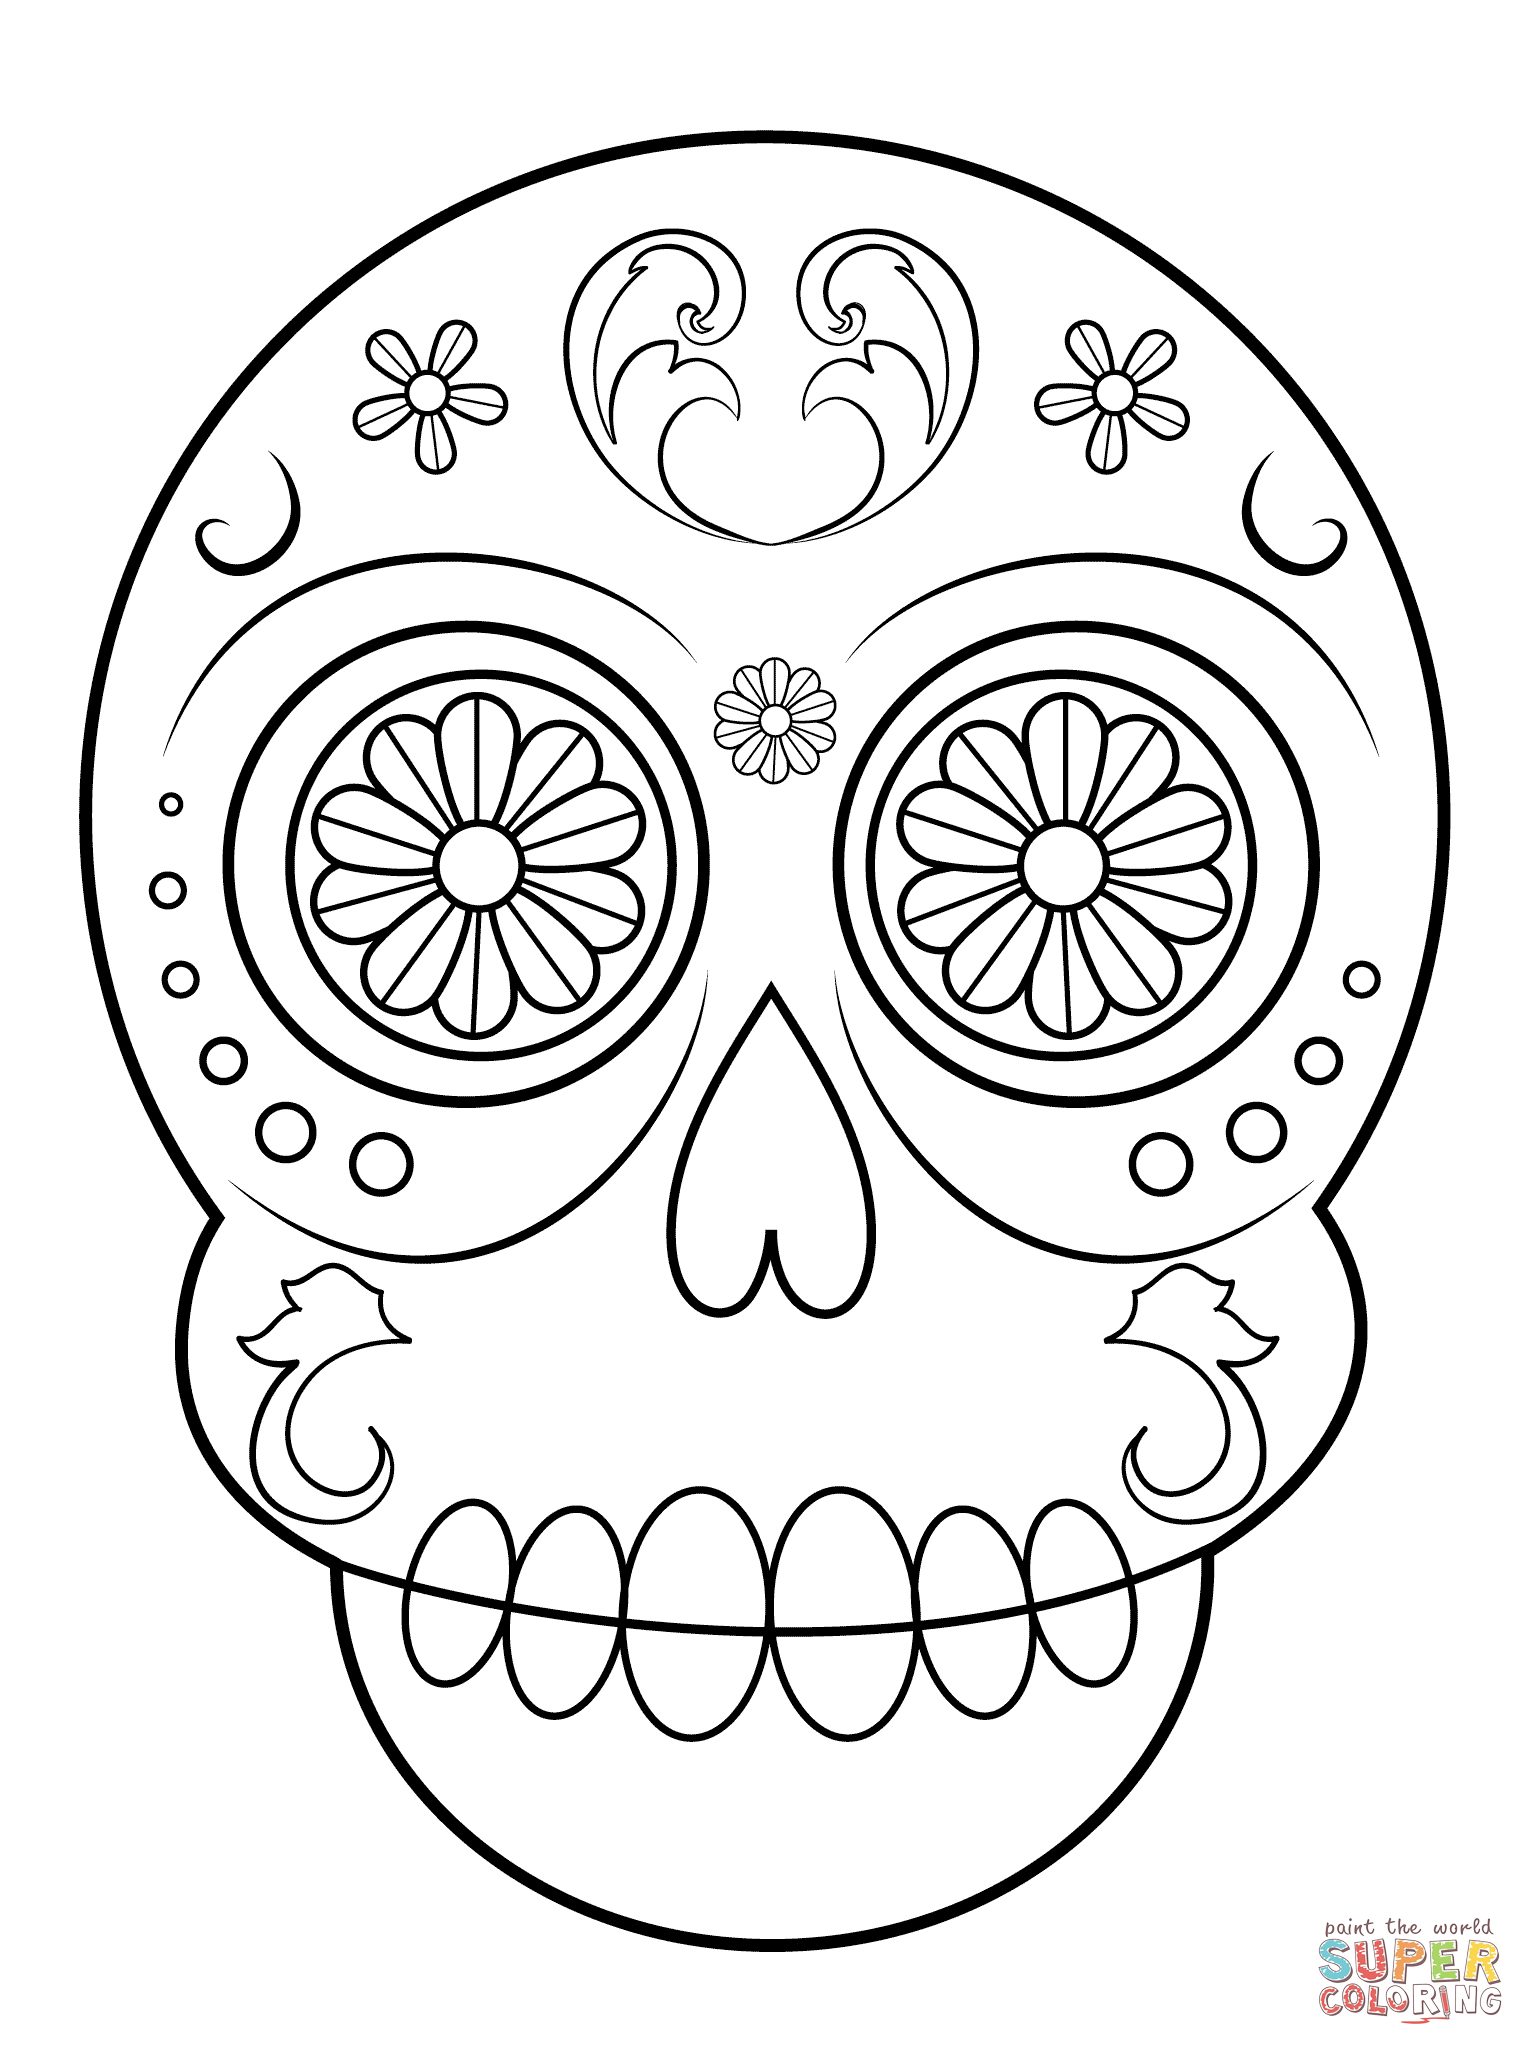 Day Of The Dead Sugar Skull Coloring Page | Free Printable Coloring - Free Printable Sugar Skull Day Of The Dead Mask